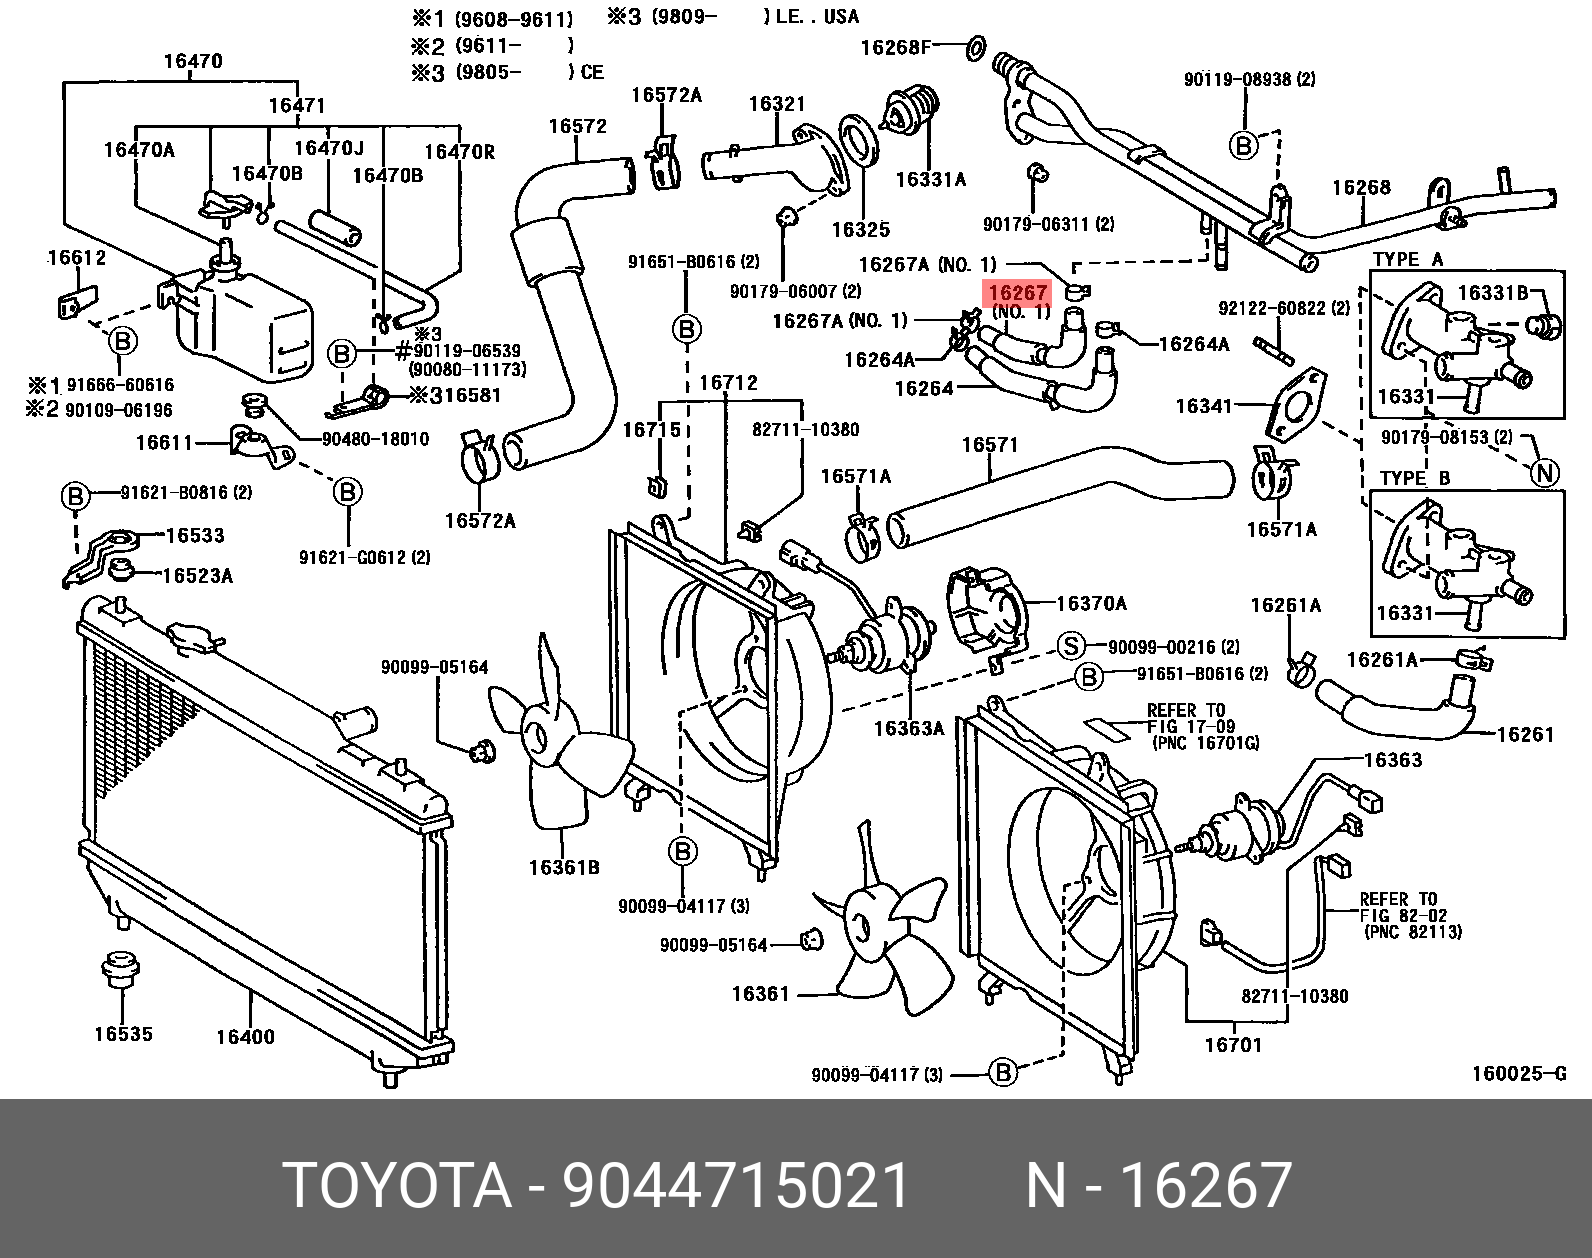 COROLLA LEVIN 198705 - 199106, HOSE, WATER BY-PASS, NO.3